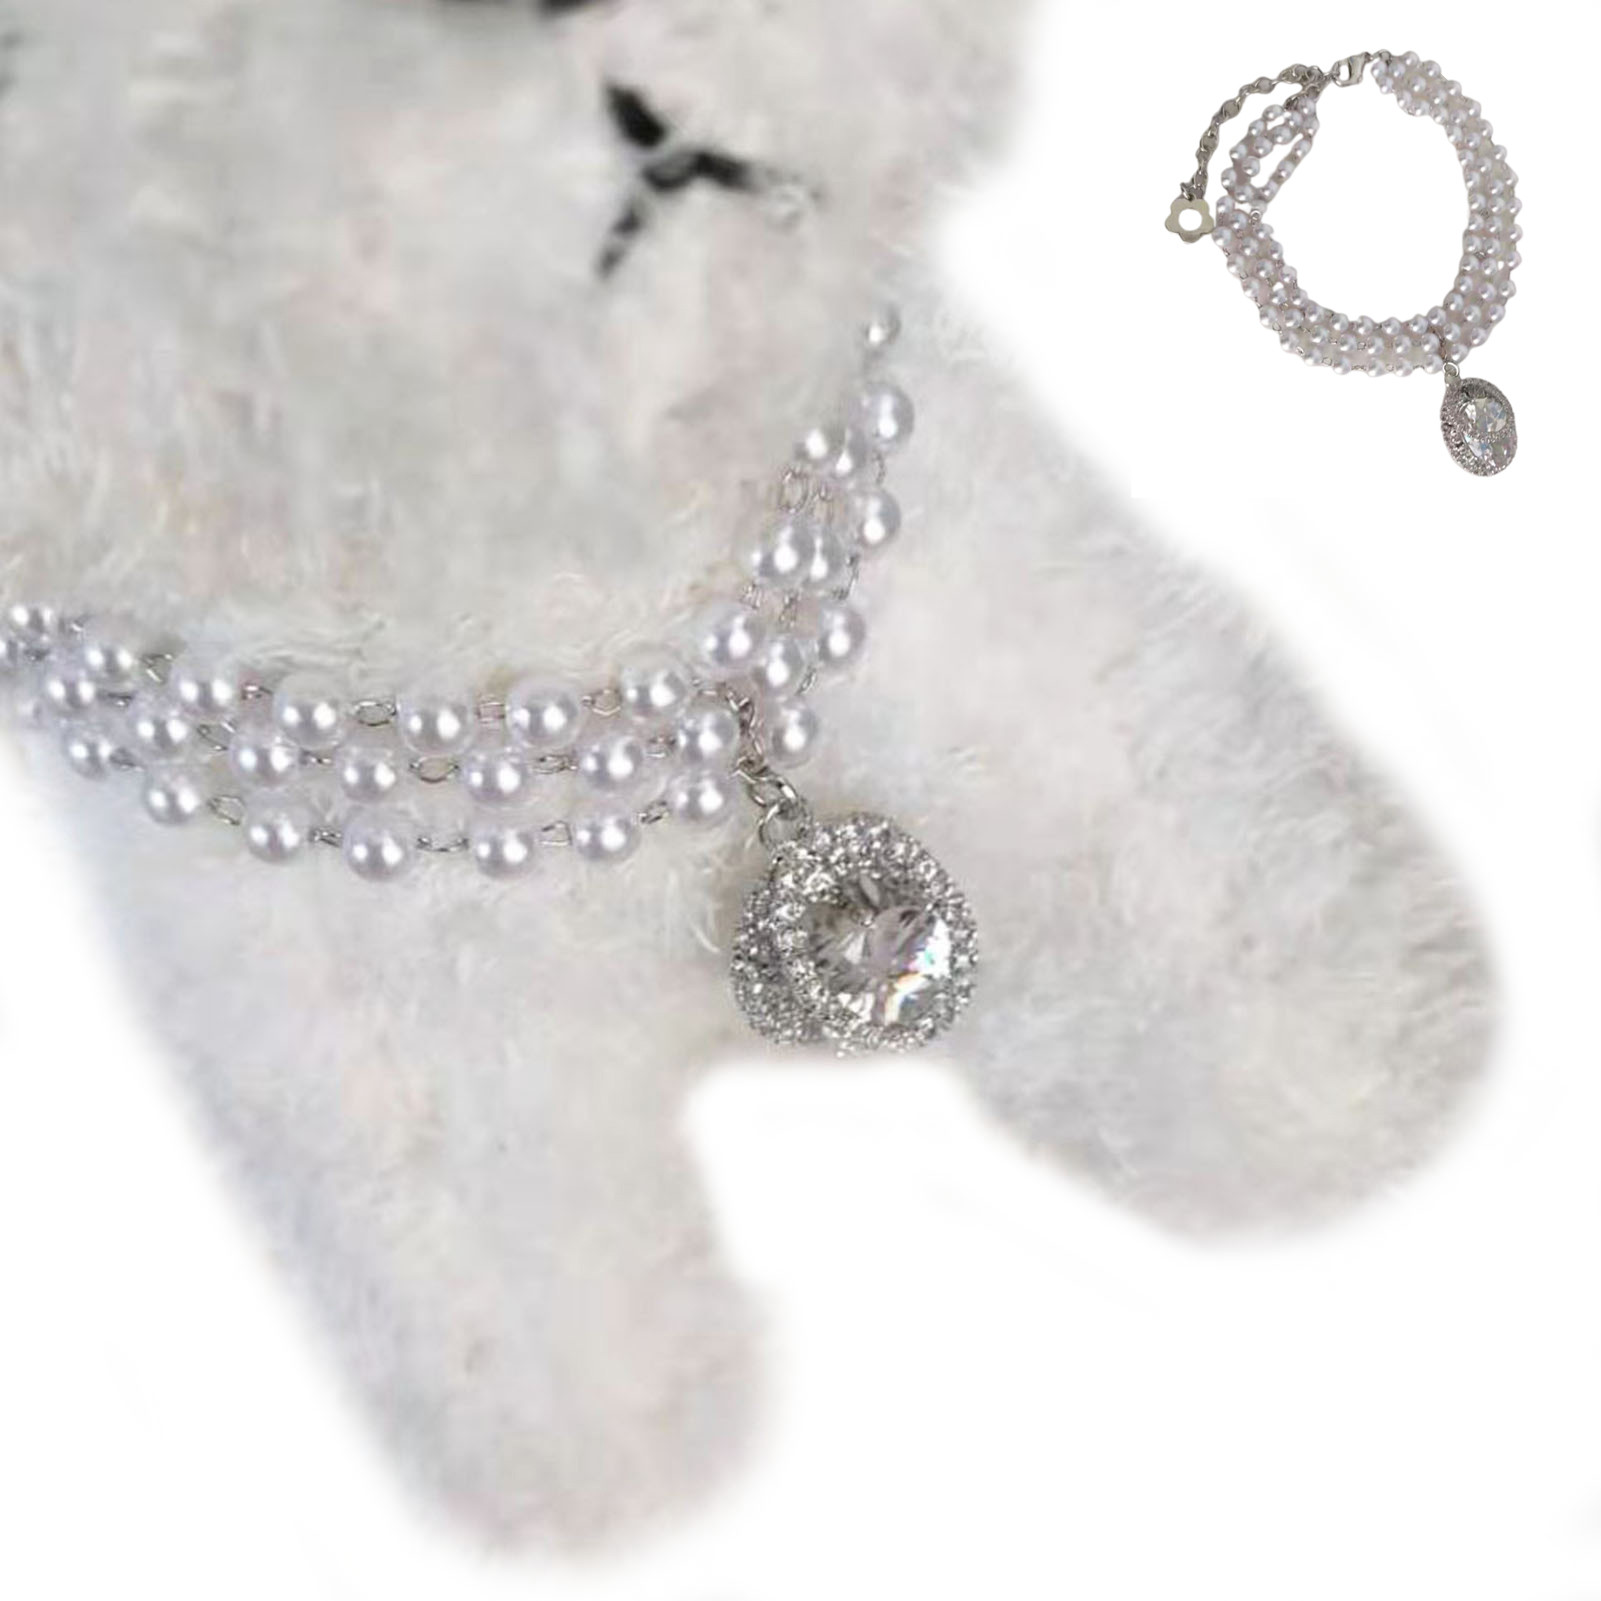 Pet Enjoy Exquisite Dog Pearl Collar Necklace,Sparkling 3 Rows Pearl Pet Necklace with Faux Rhinestone Pendant,Pet Pearl Neck Strap for Dogs Cats Puppy Kitten - image 1 of 8